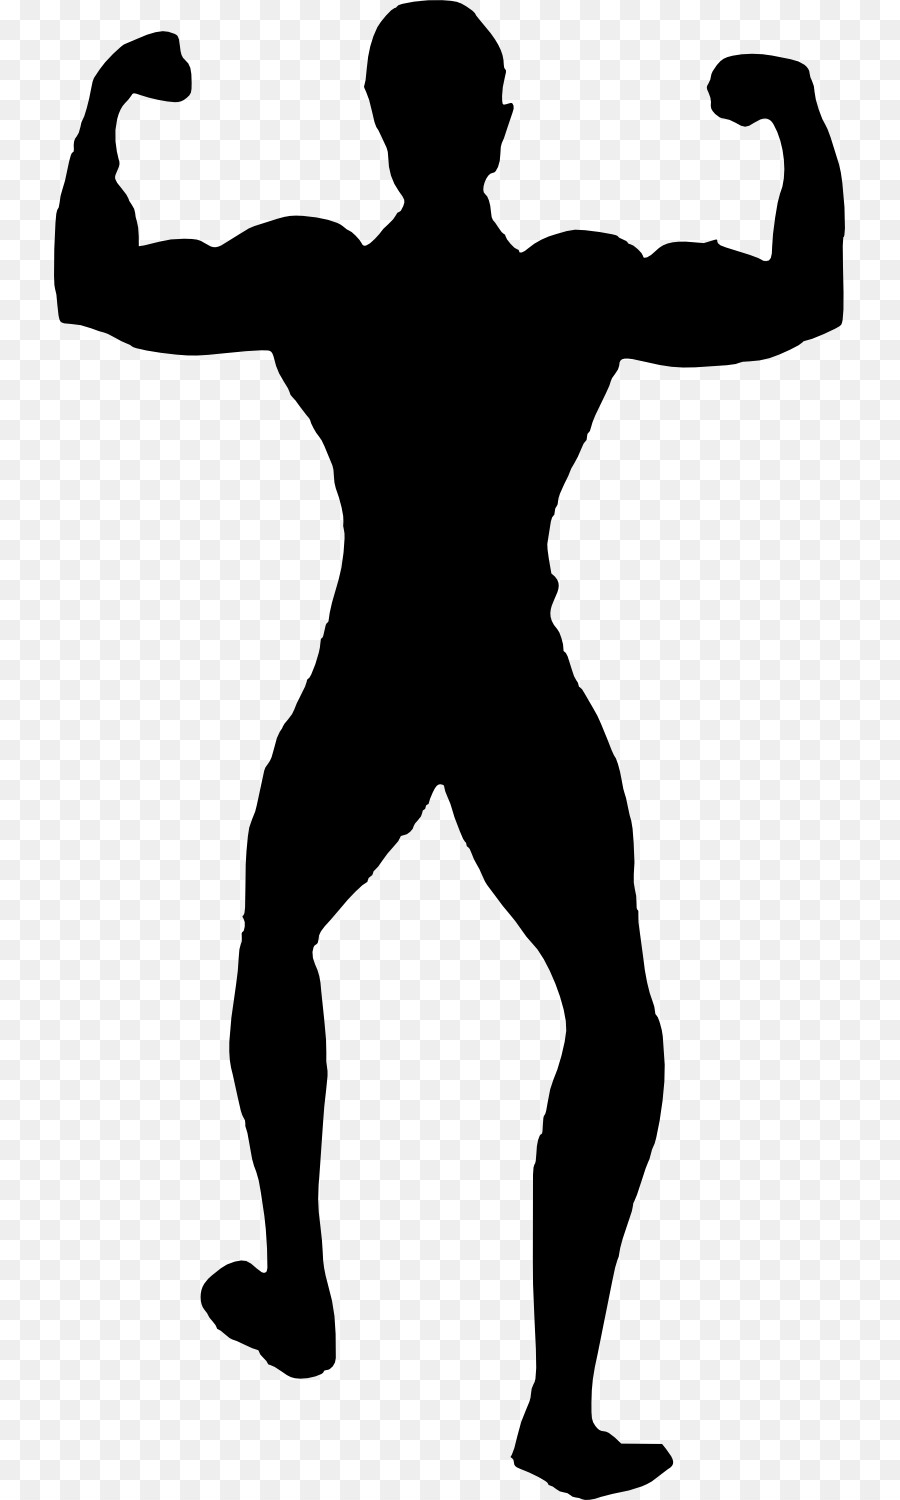 Silhouette Bodybuilding Female Physical fitness - bodybuilding png download - 791*1500 - Free Transparent Silhouette png Download.